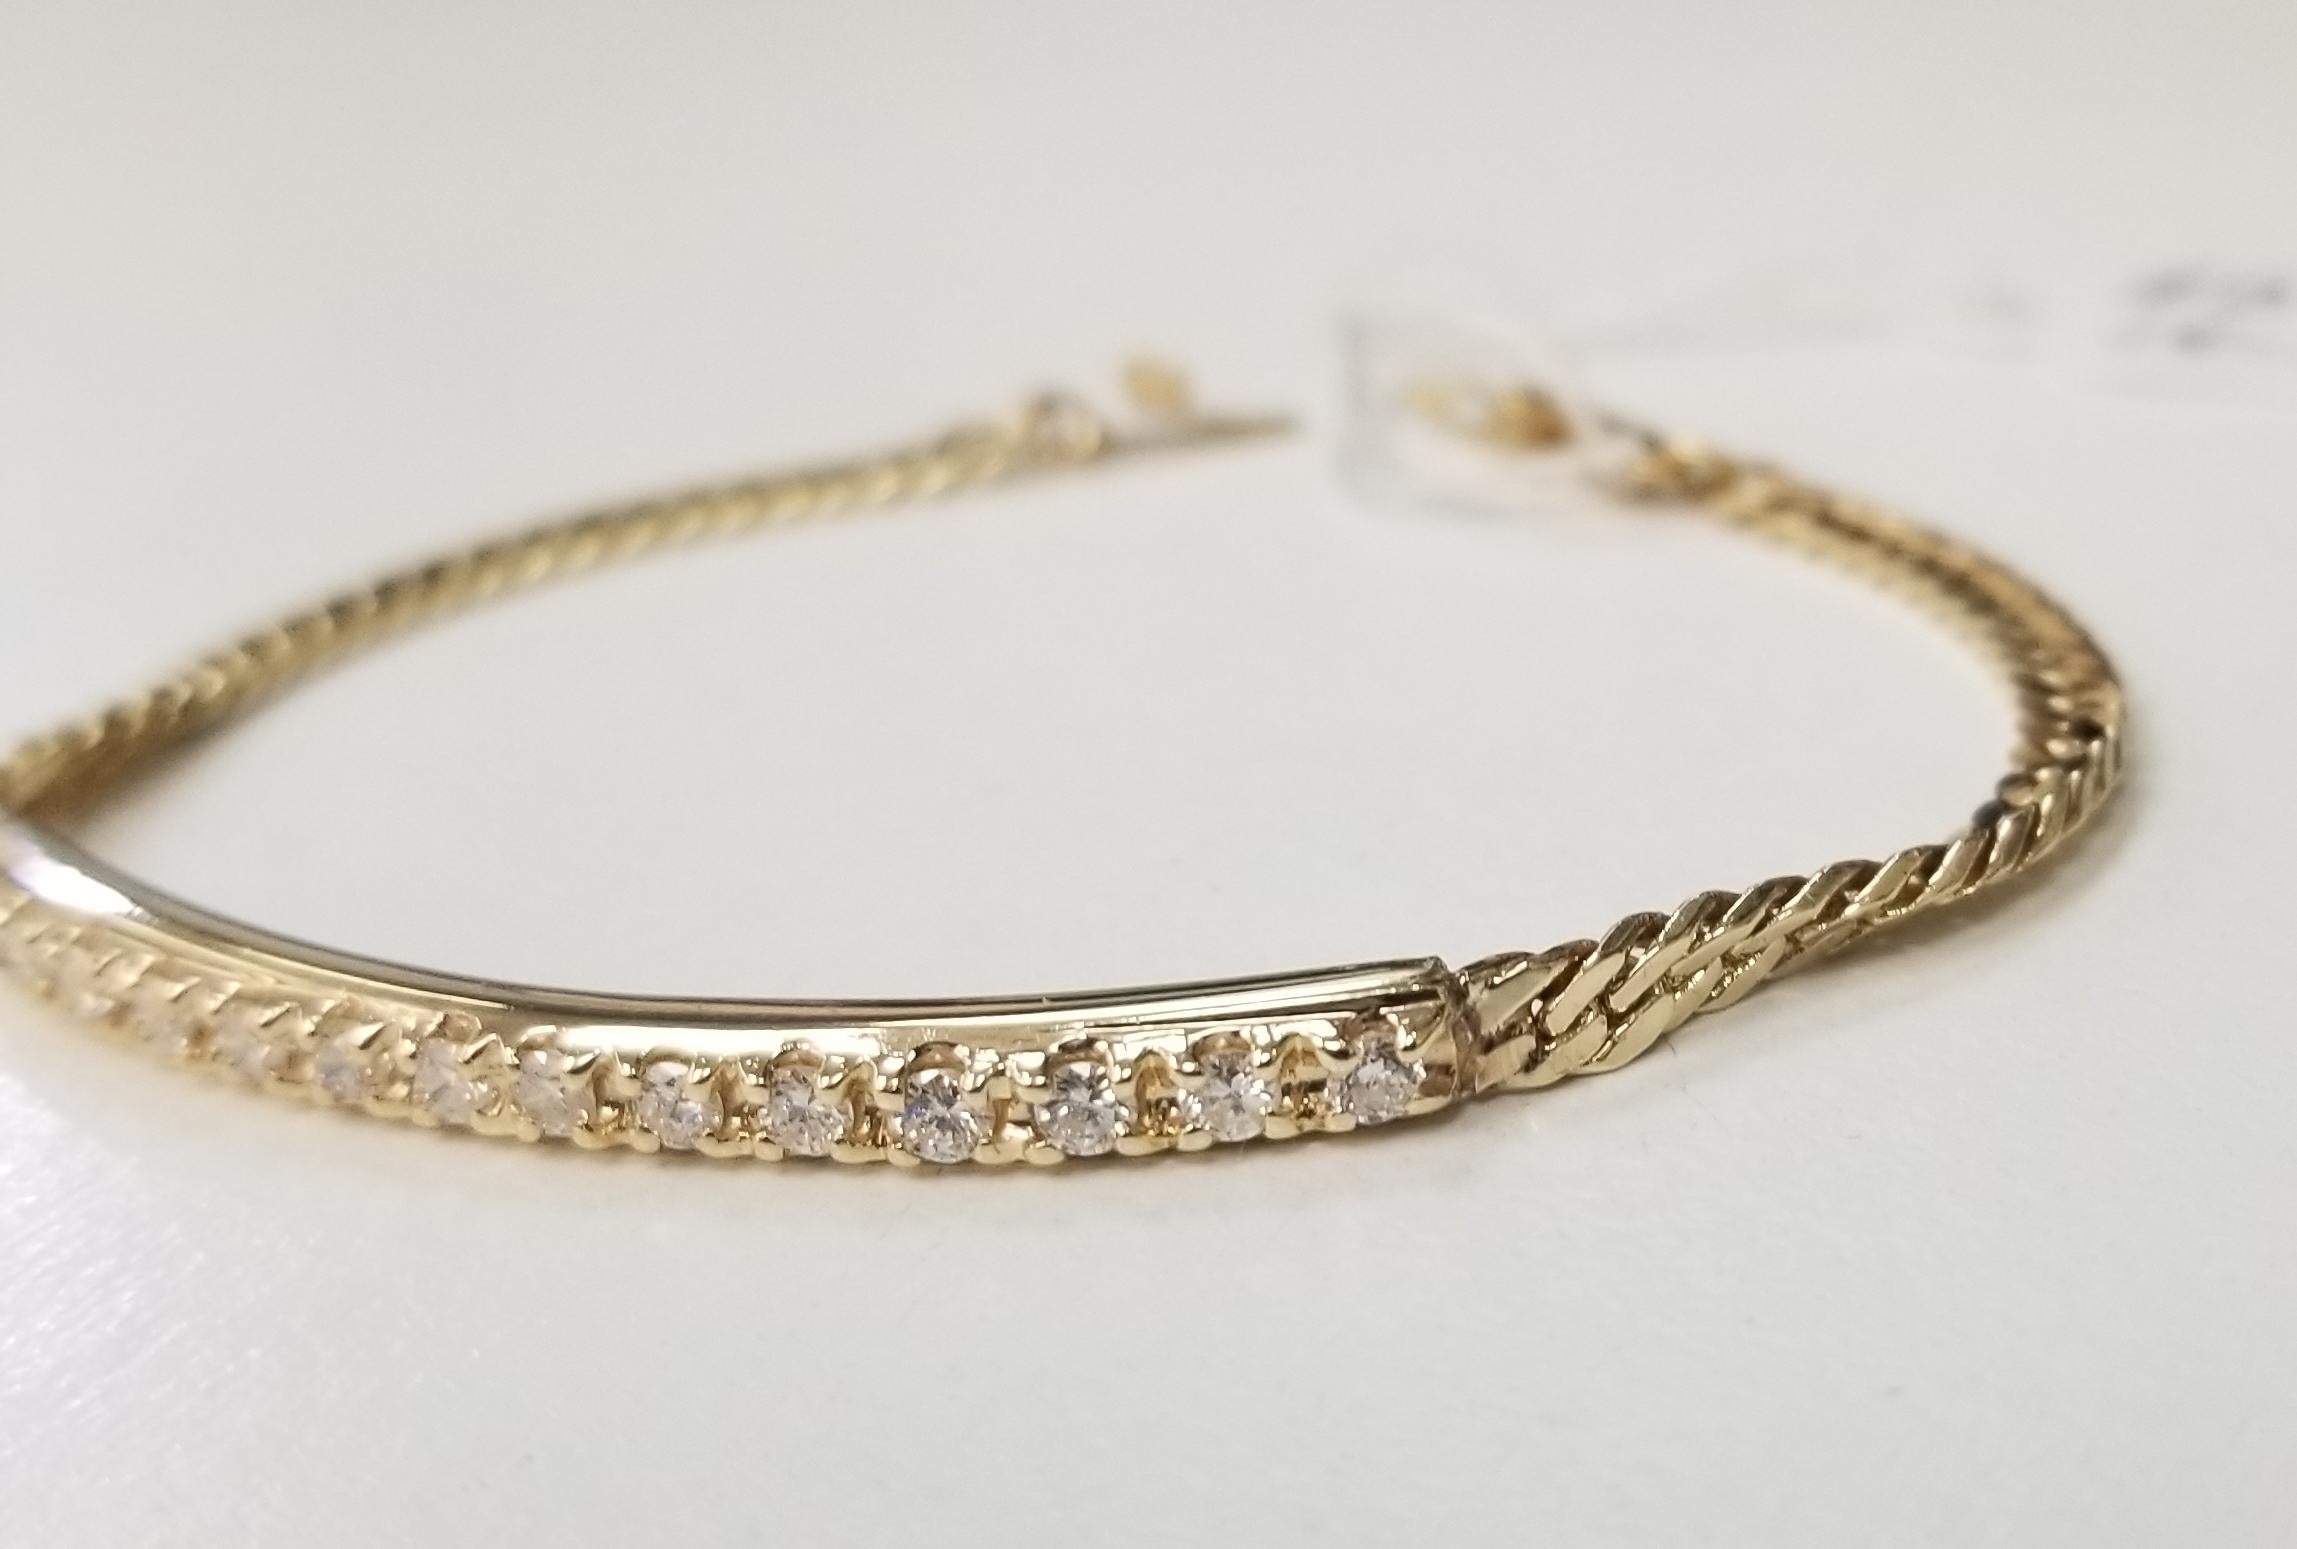 14k yellow gold diamond bar and chain bracelet containing 14 round full cut diamonds; color G, clarity VS and weight .70pts. the bracelet will fit a 7 inch wrist.